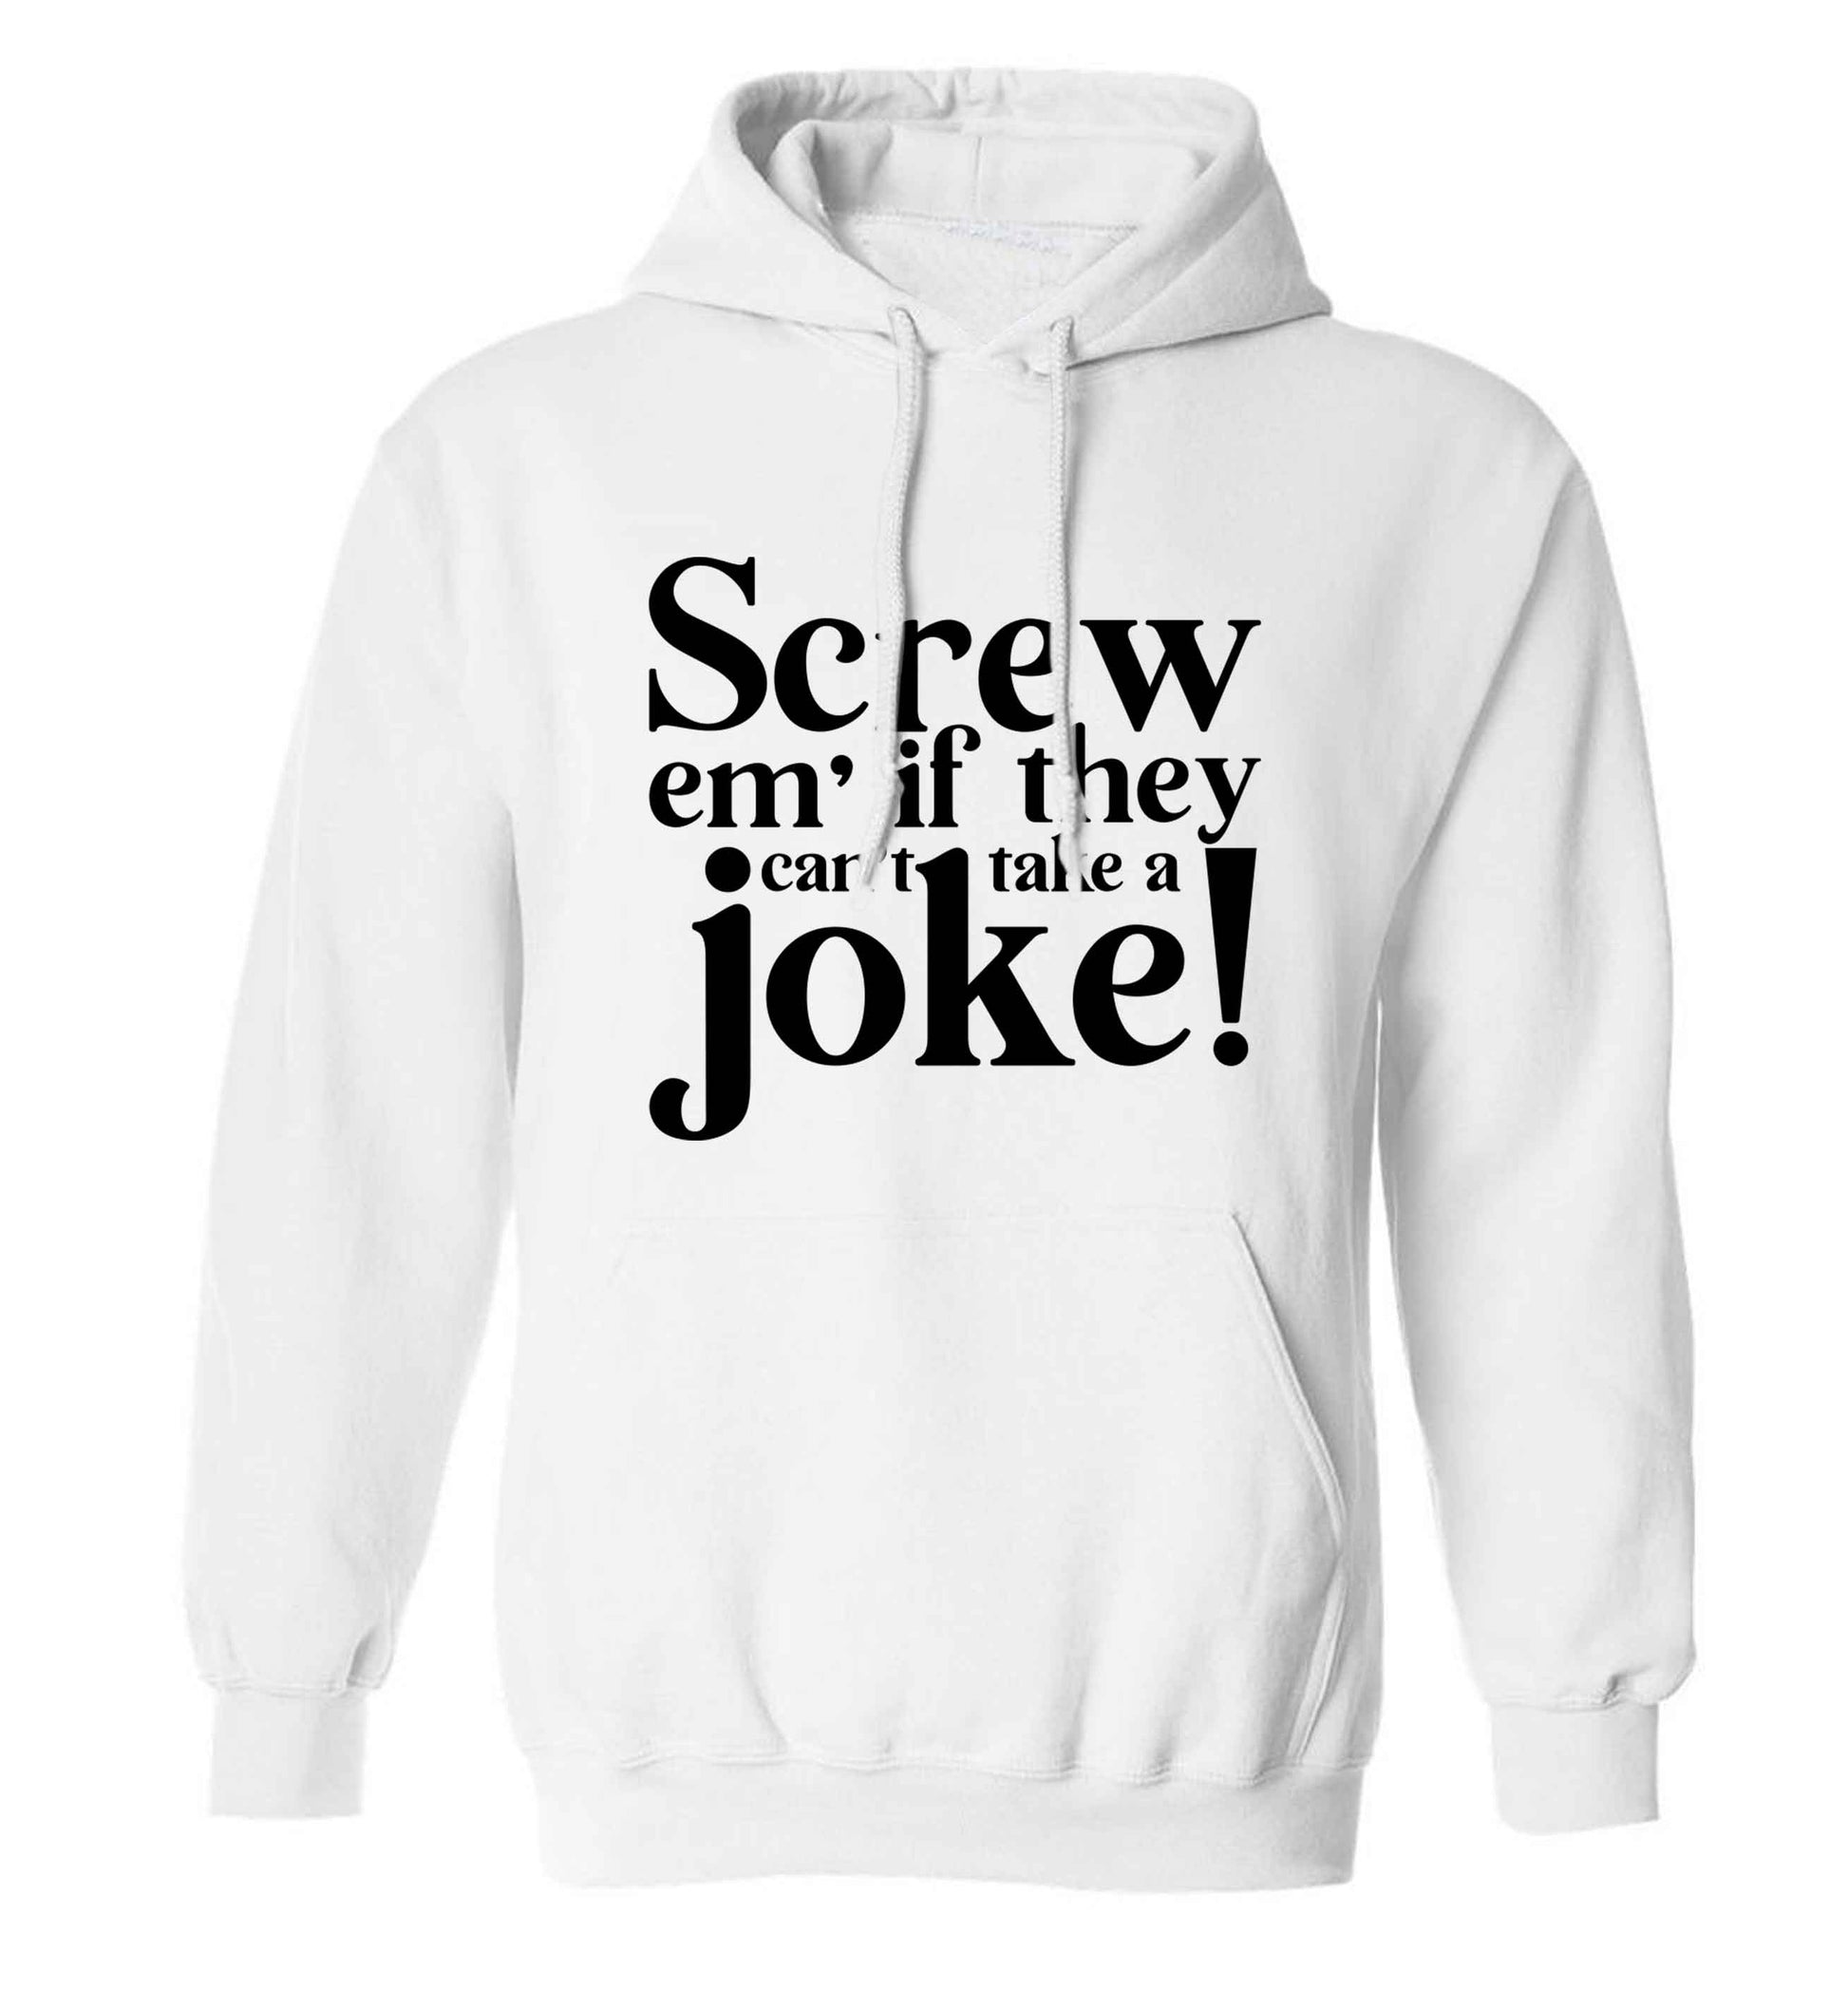 We love this for YOU! Who else loves saying this?!  adults unisex white hoodie 2XL